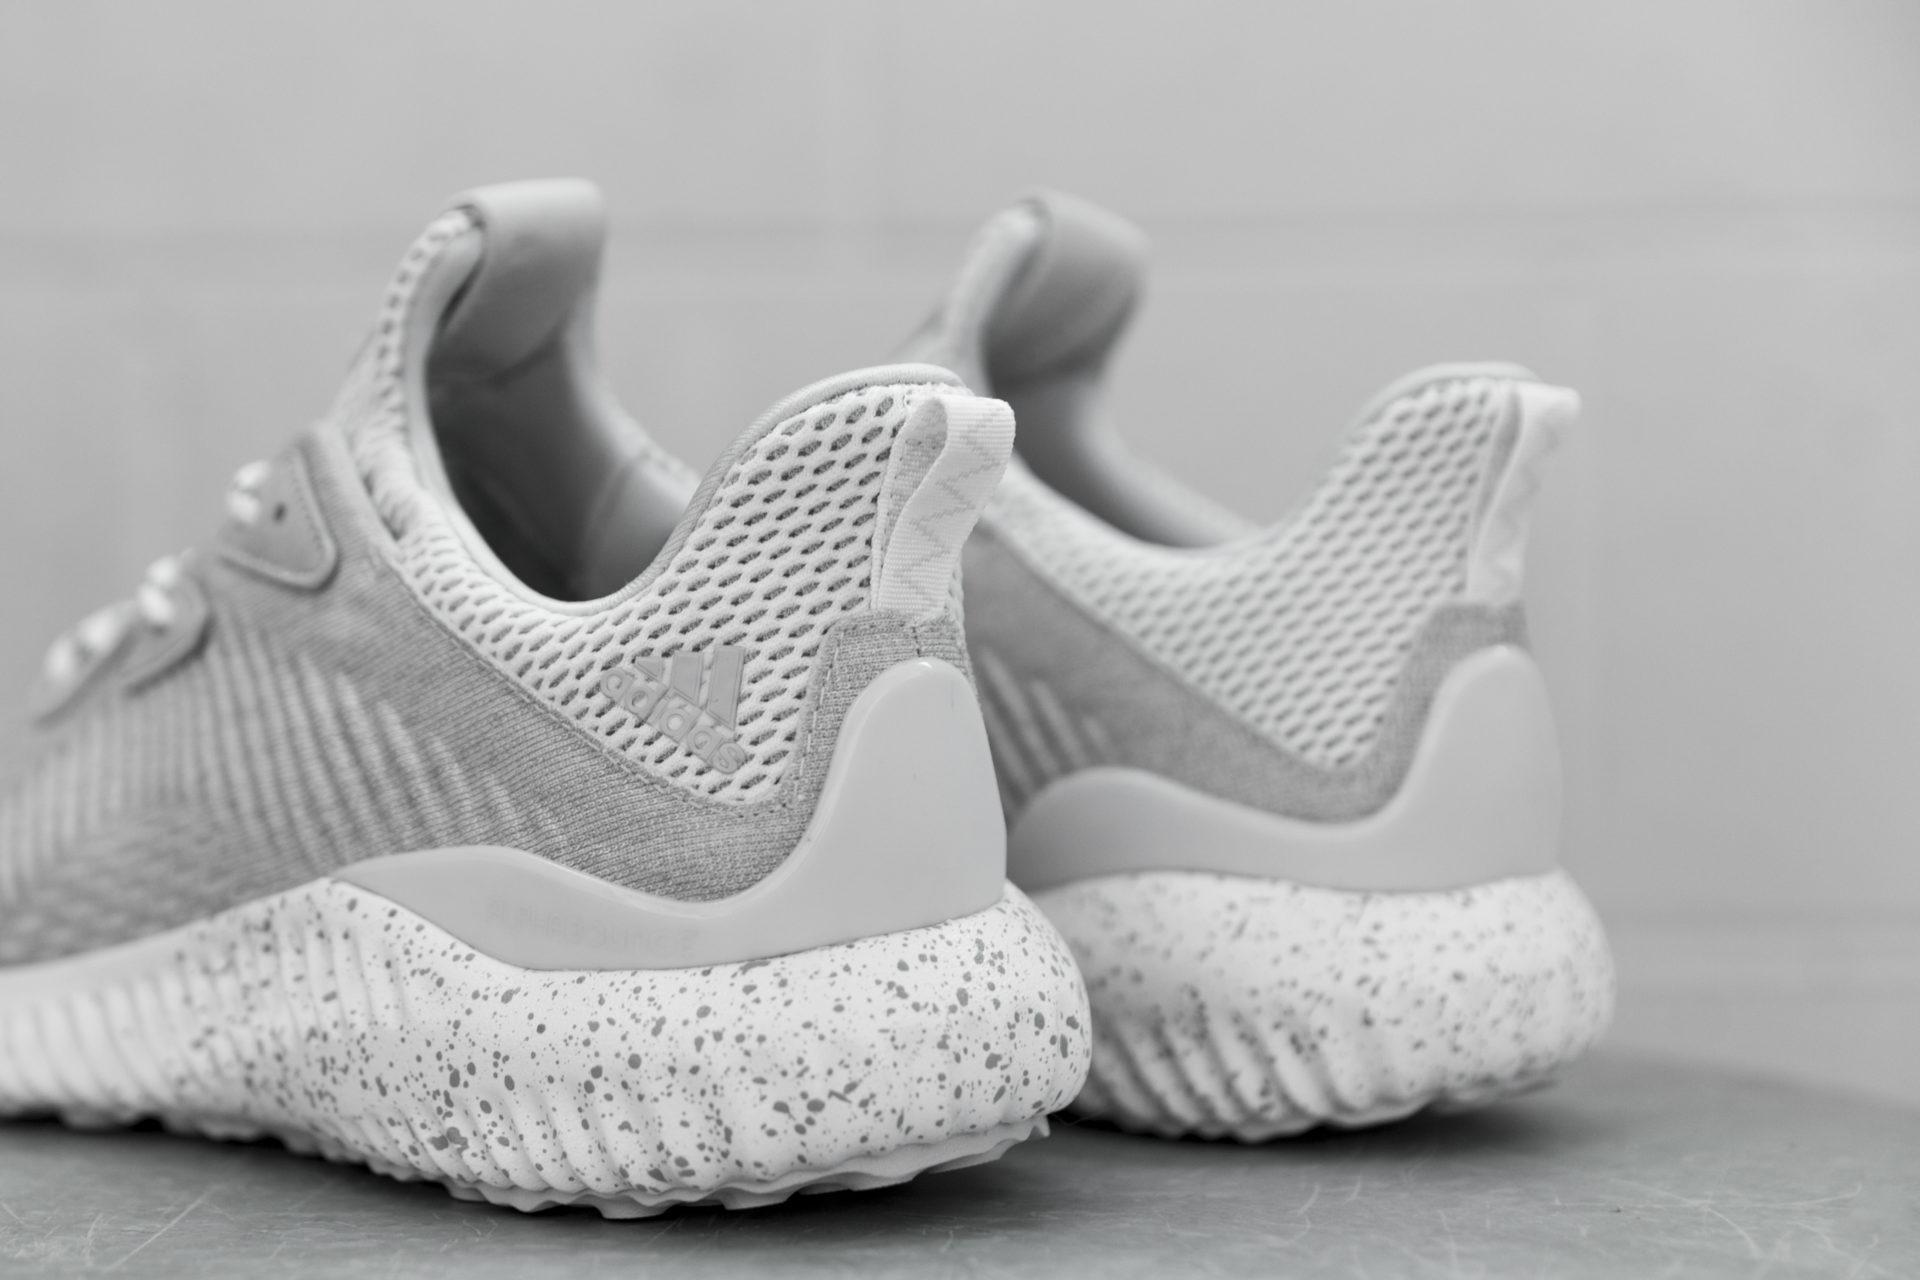 Reigning Champ x adidas Alphabounce